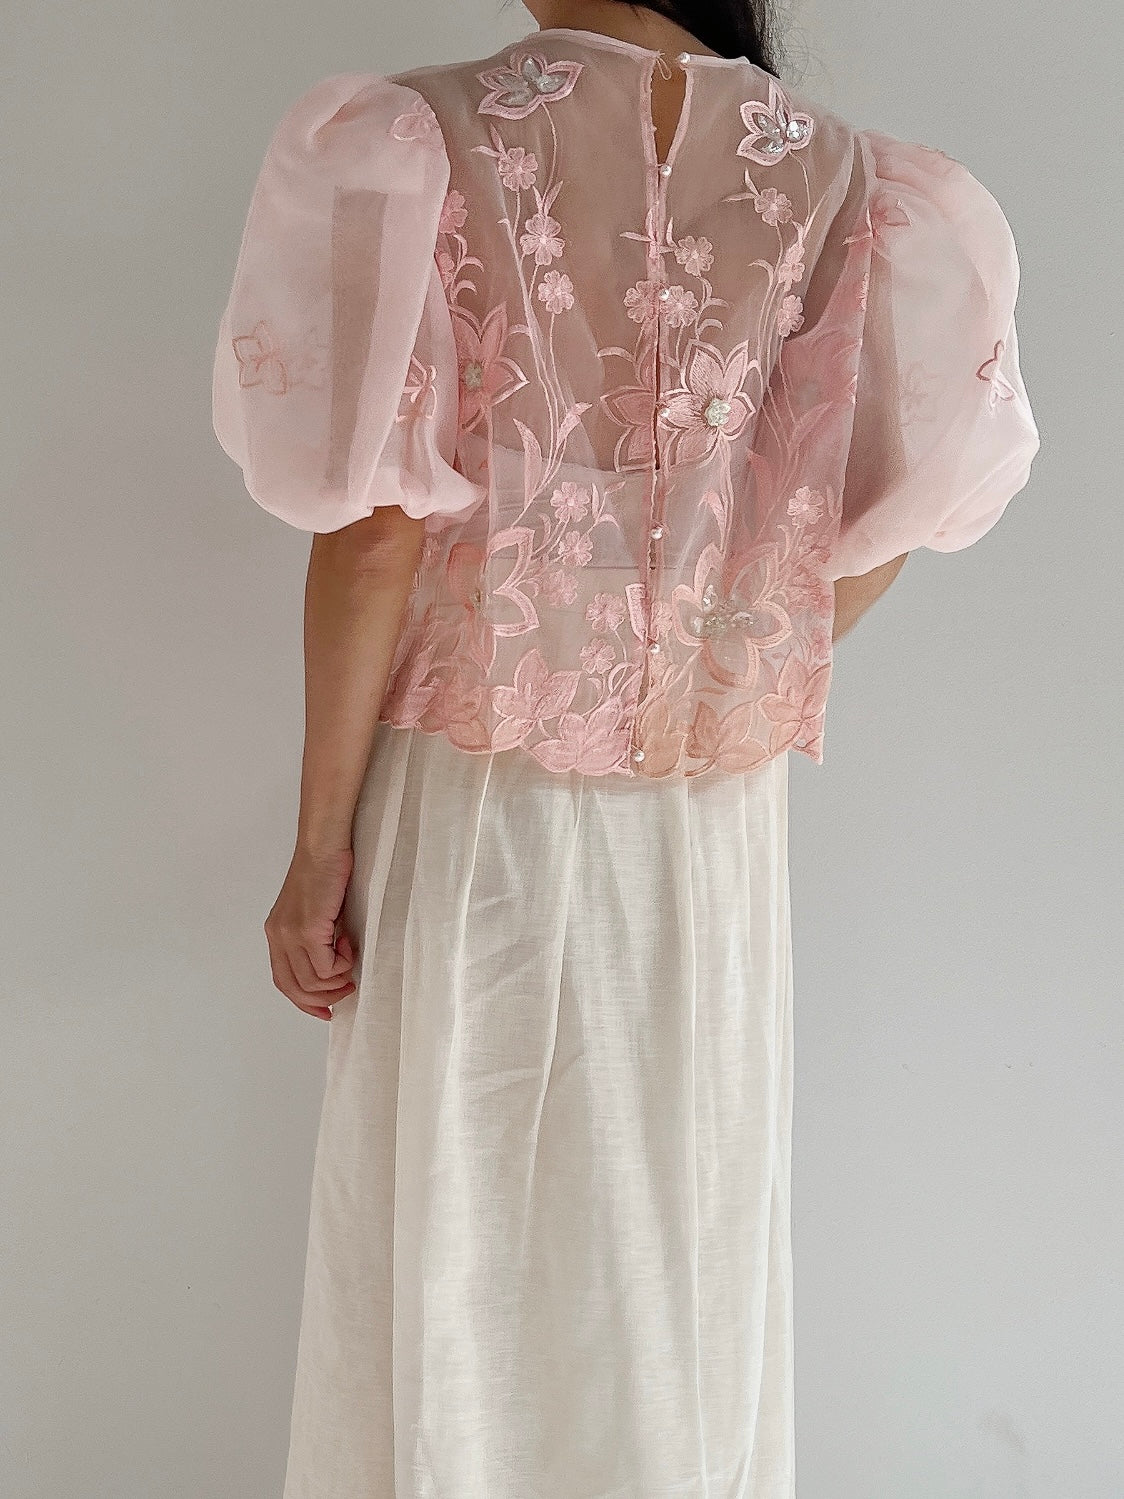 Vintage Voile Organza Embroidered Top - M